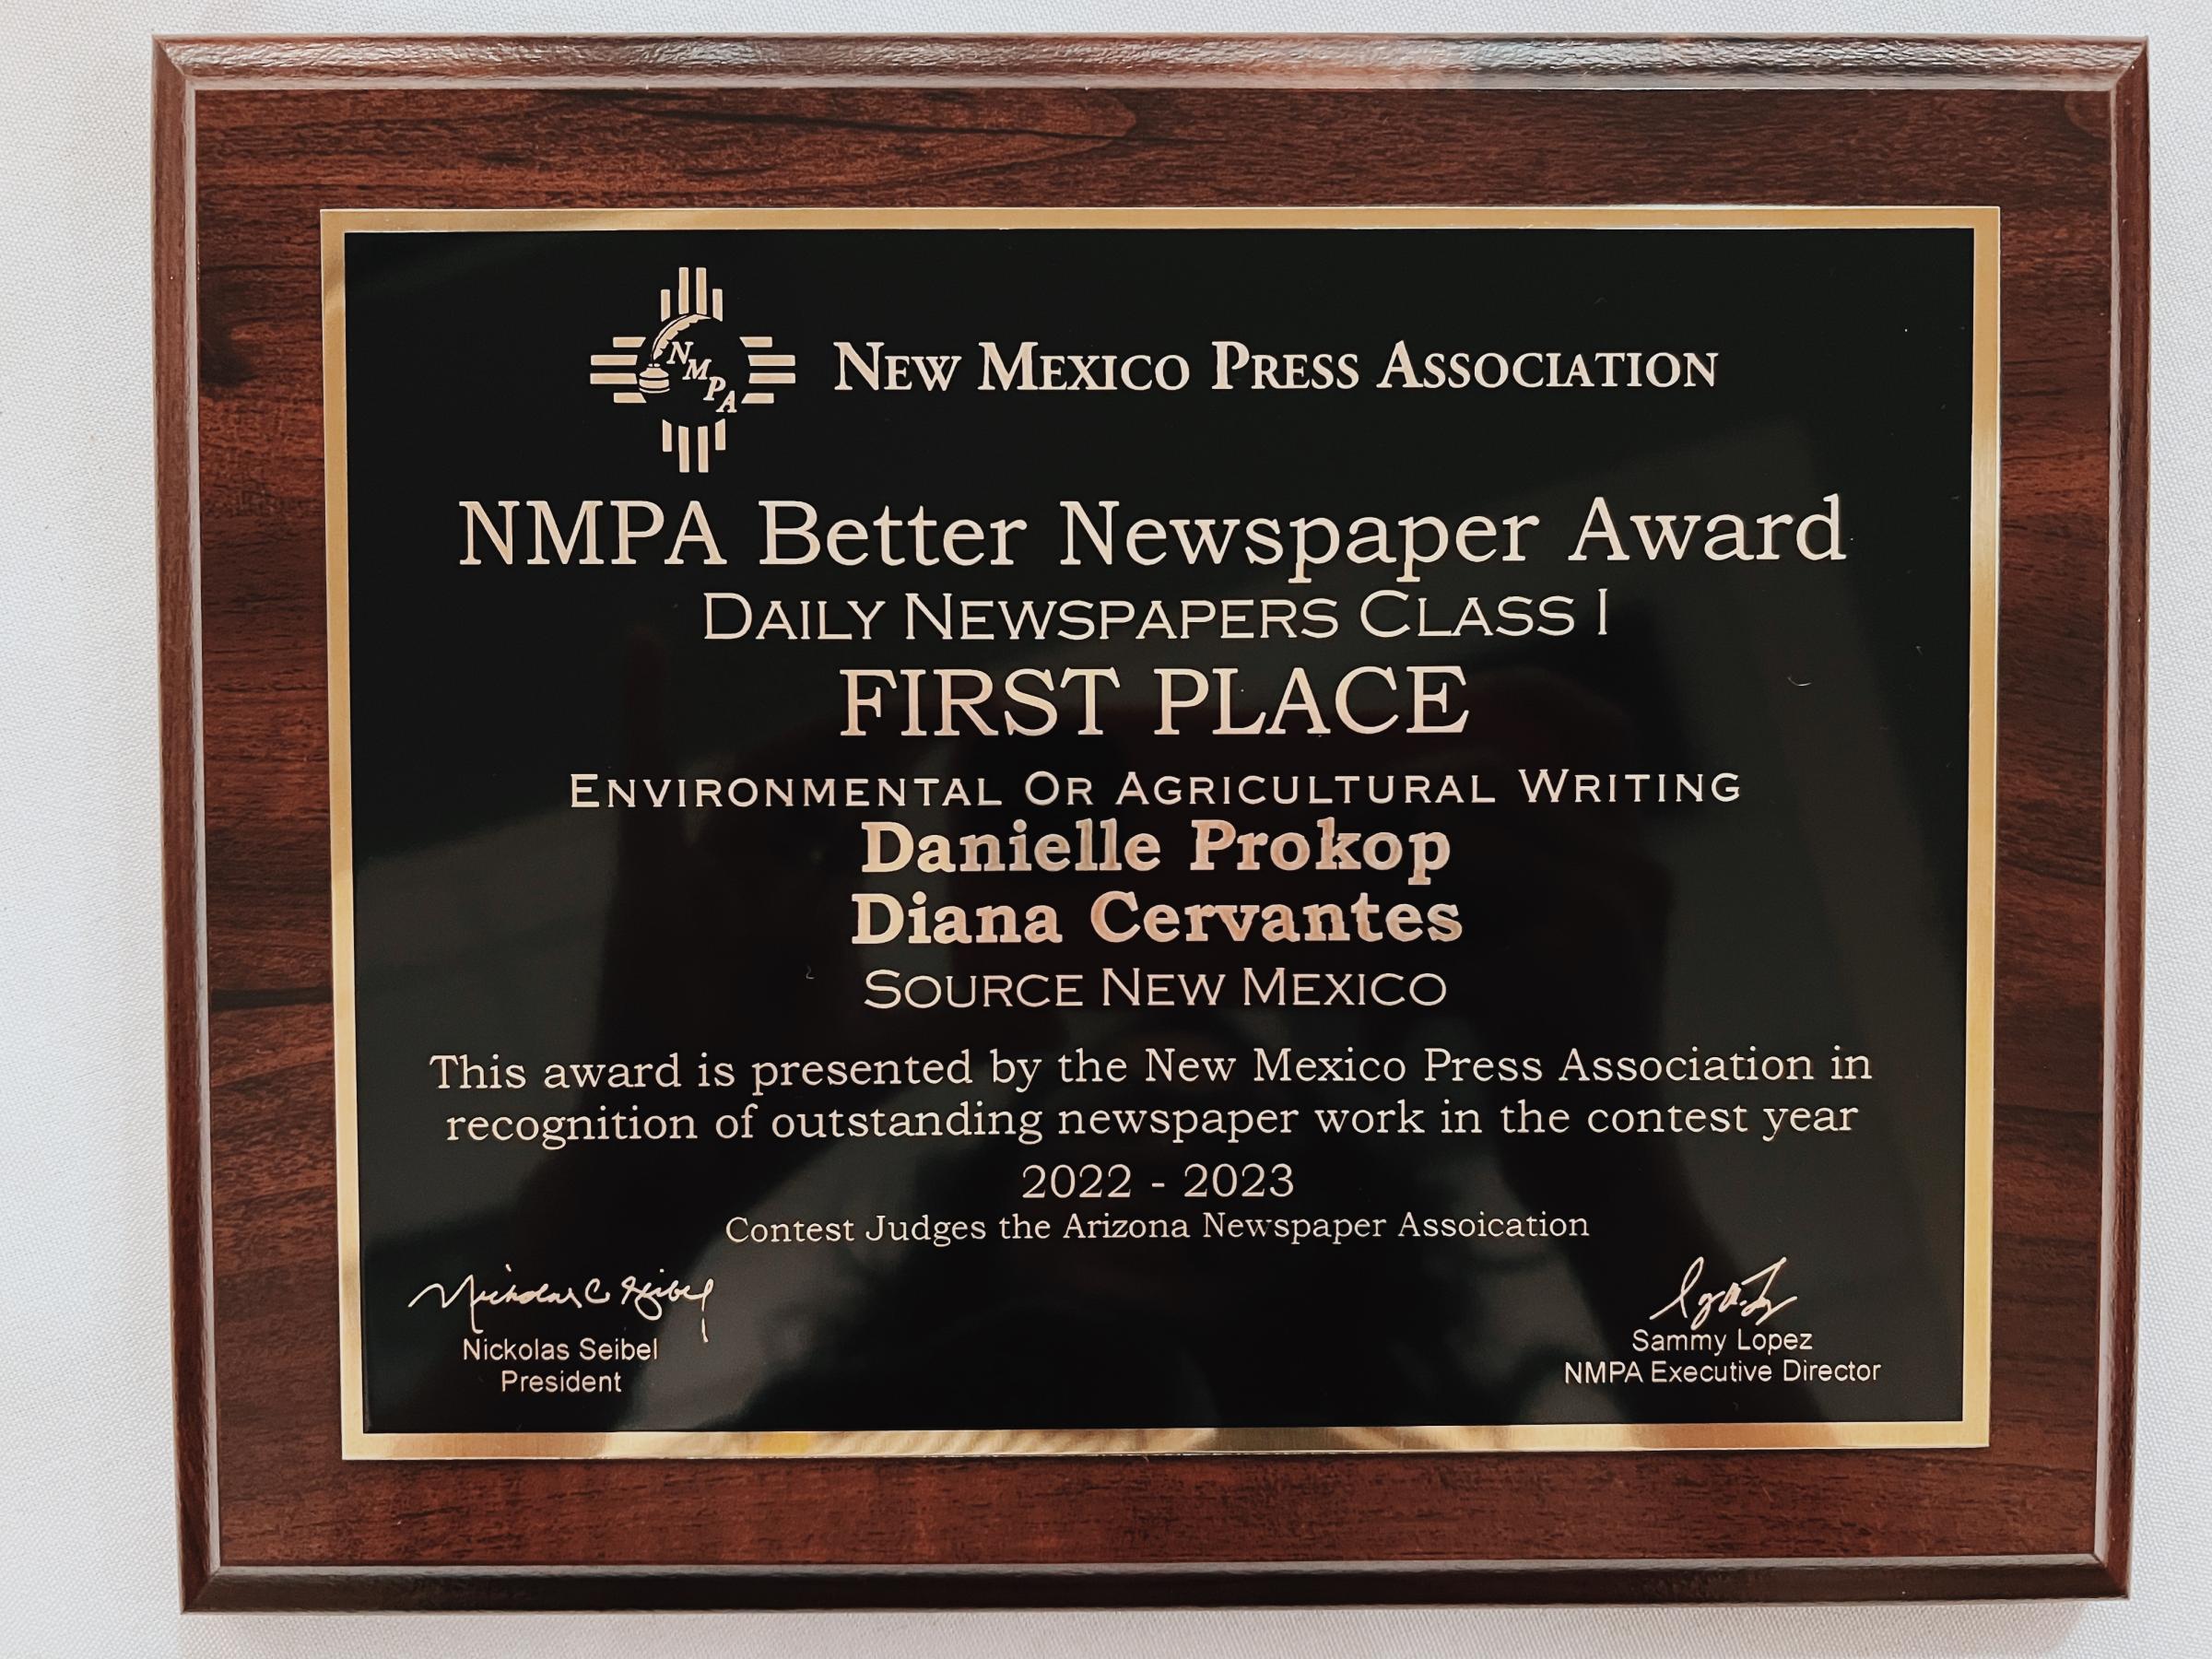 New Mexico Press Association Awards: First Place in Best Series & Environmental Writing for "Crisis on the Rio Grande"